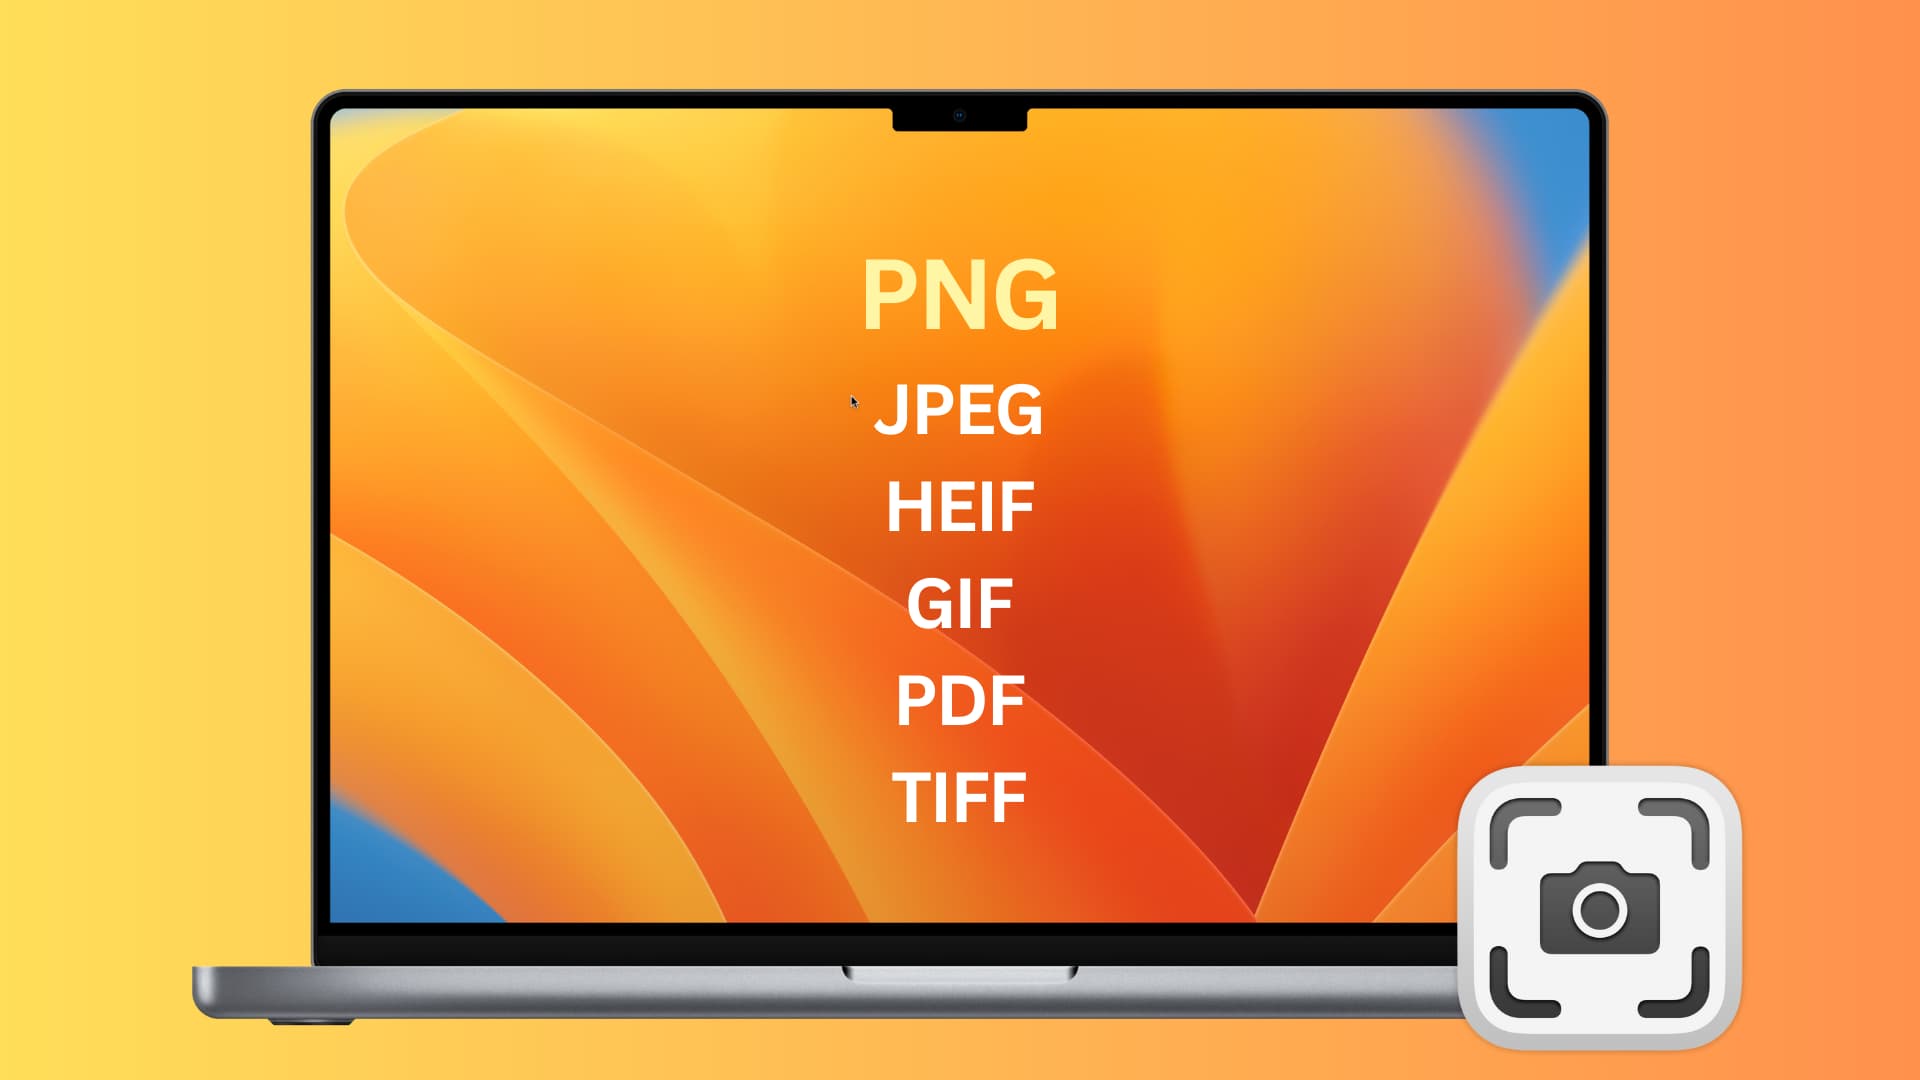 MacBook with PNG, JPEG, HEIF, GIF, PDF, and TIFF written on its screen, signifying various screenshot formats